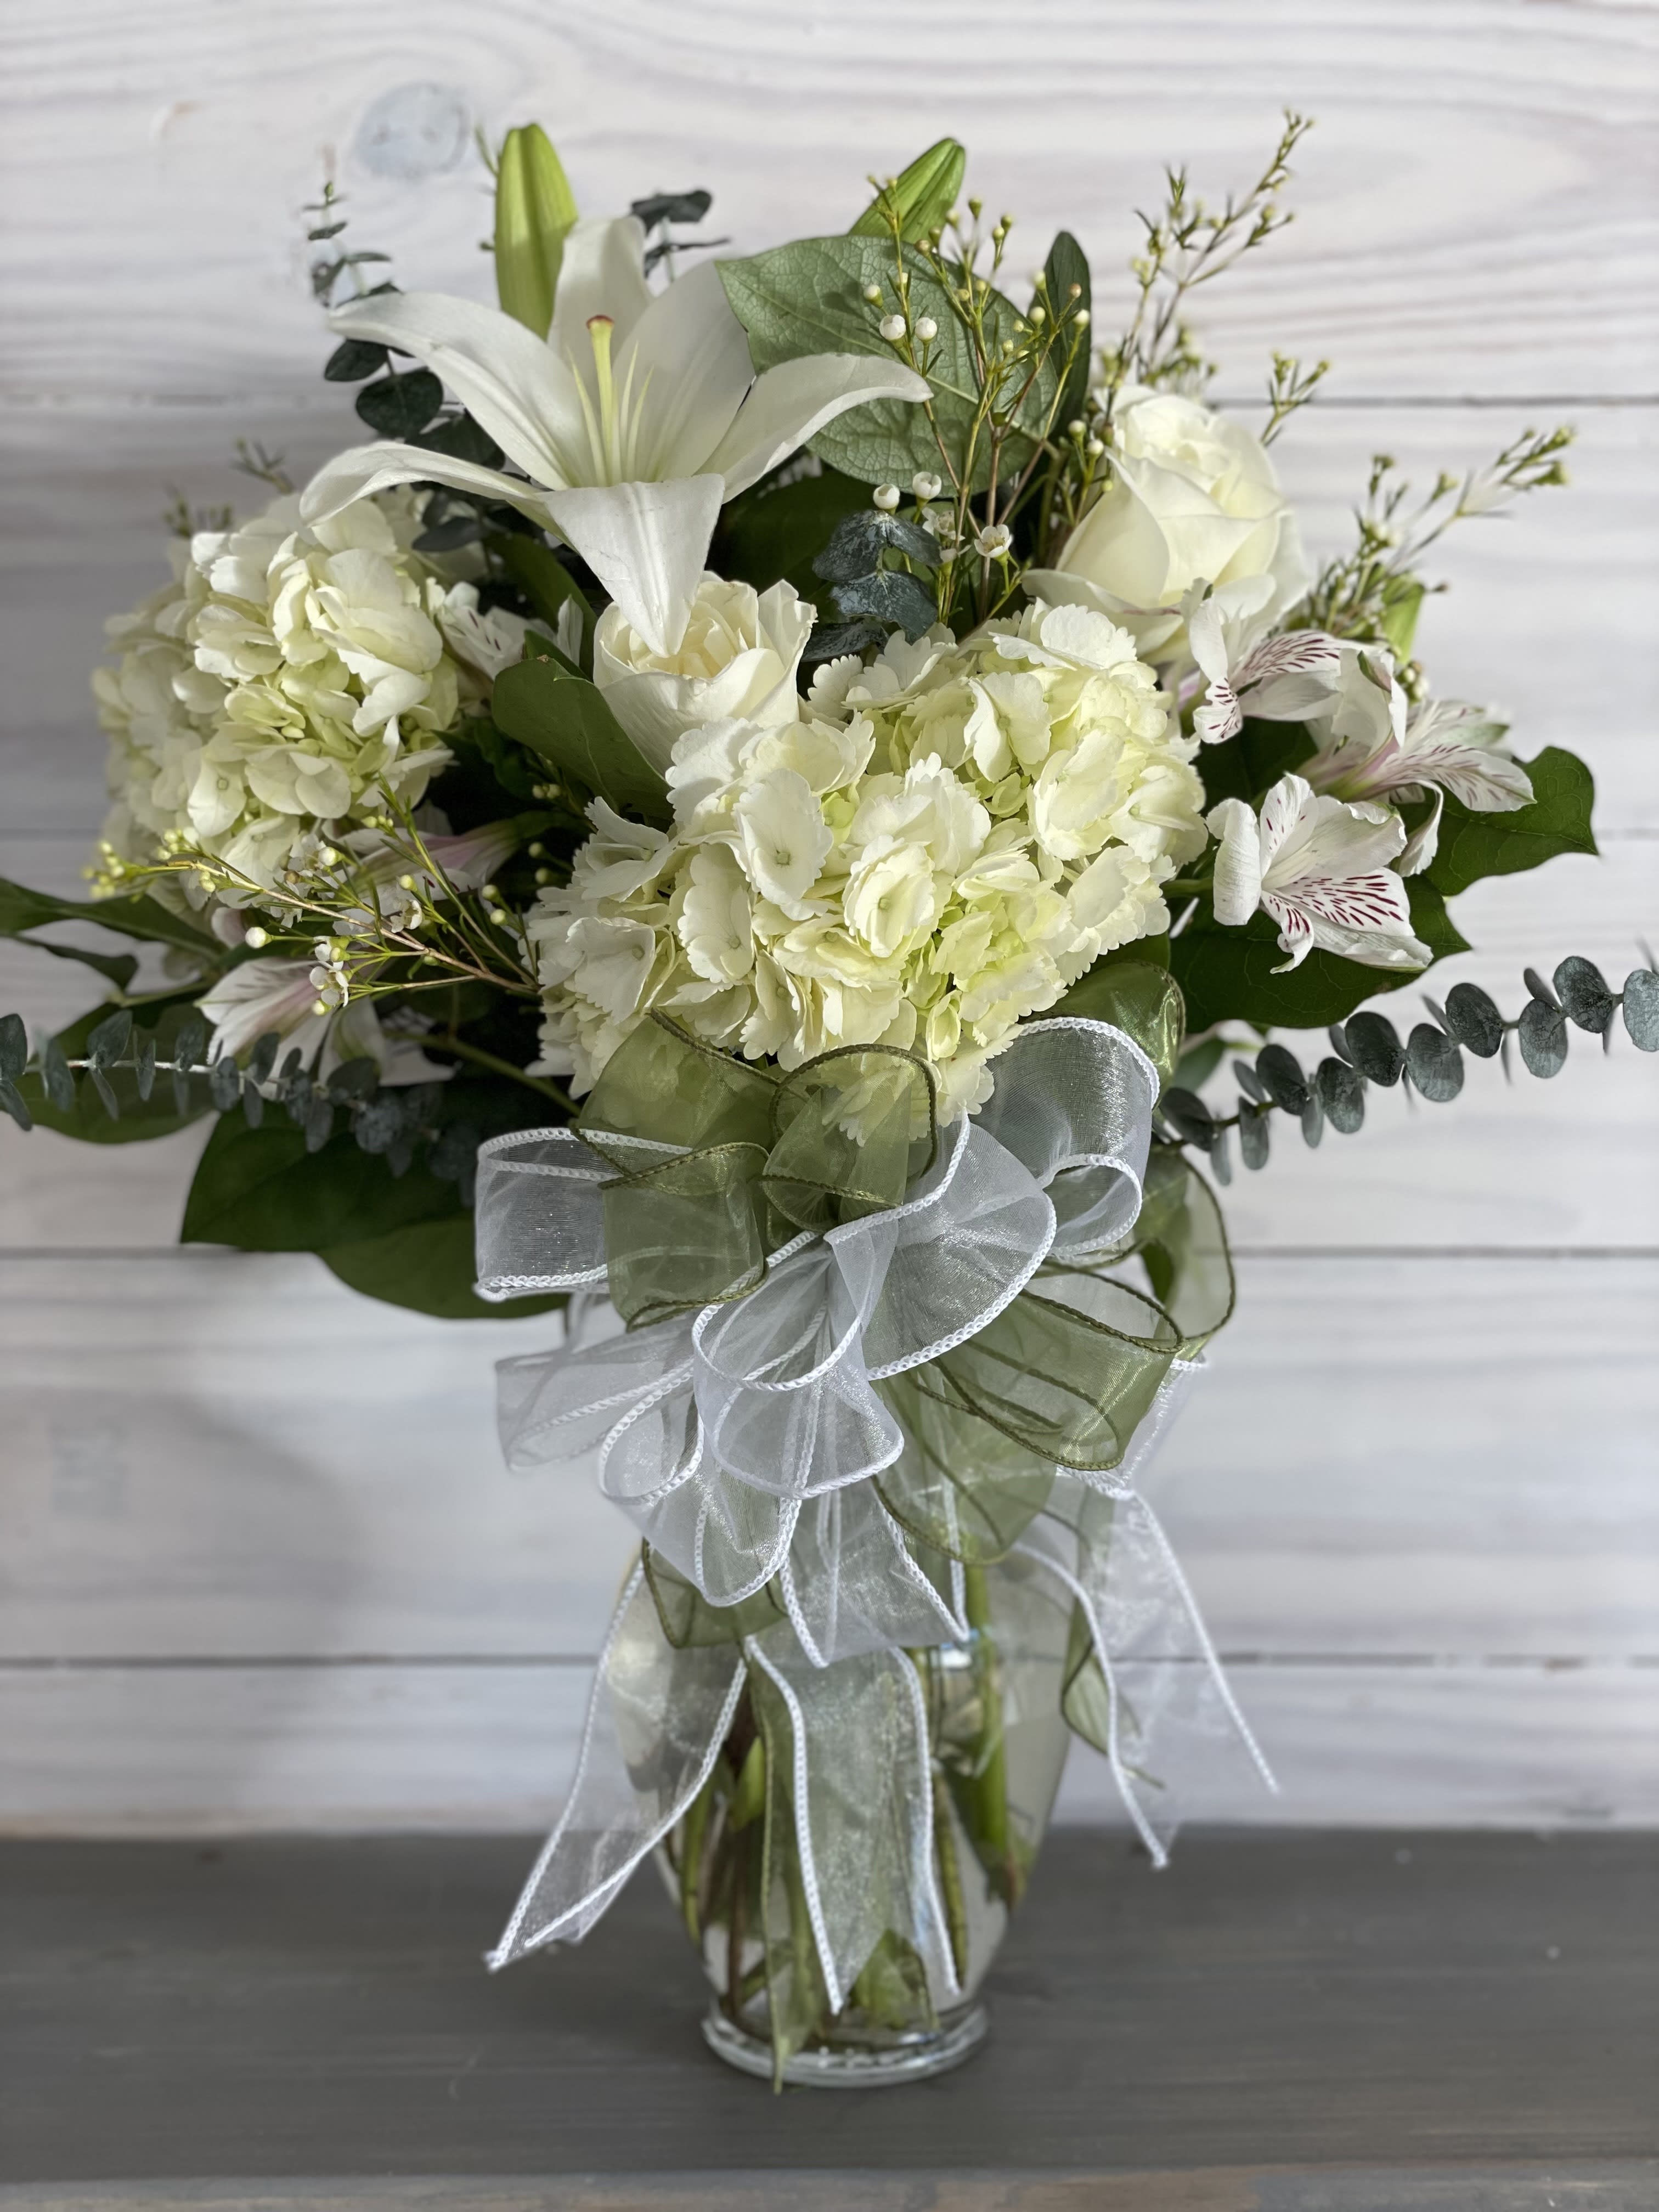 Pure Heart - This is an elegant all white arrangement of blooms in a vase.  A beautiful way to say you care. ****We will try our best to match the flowers in the picture, but there may be times when we substitute flowers. We will always try to make it have the same look and feel as the original.